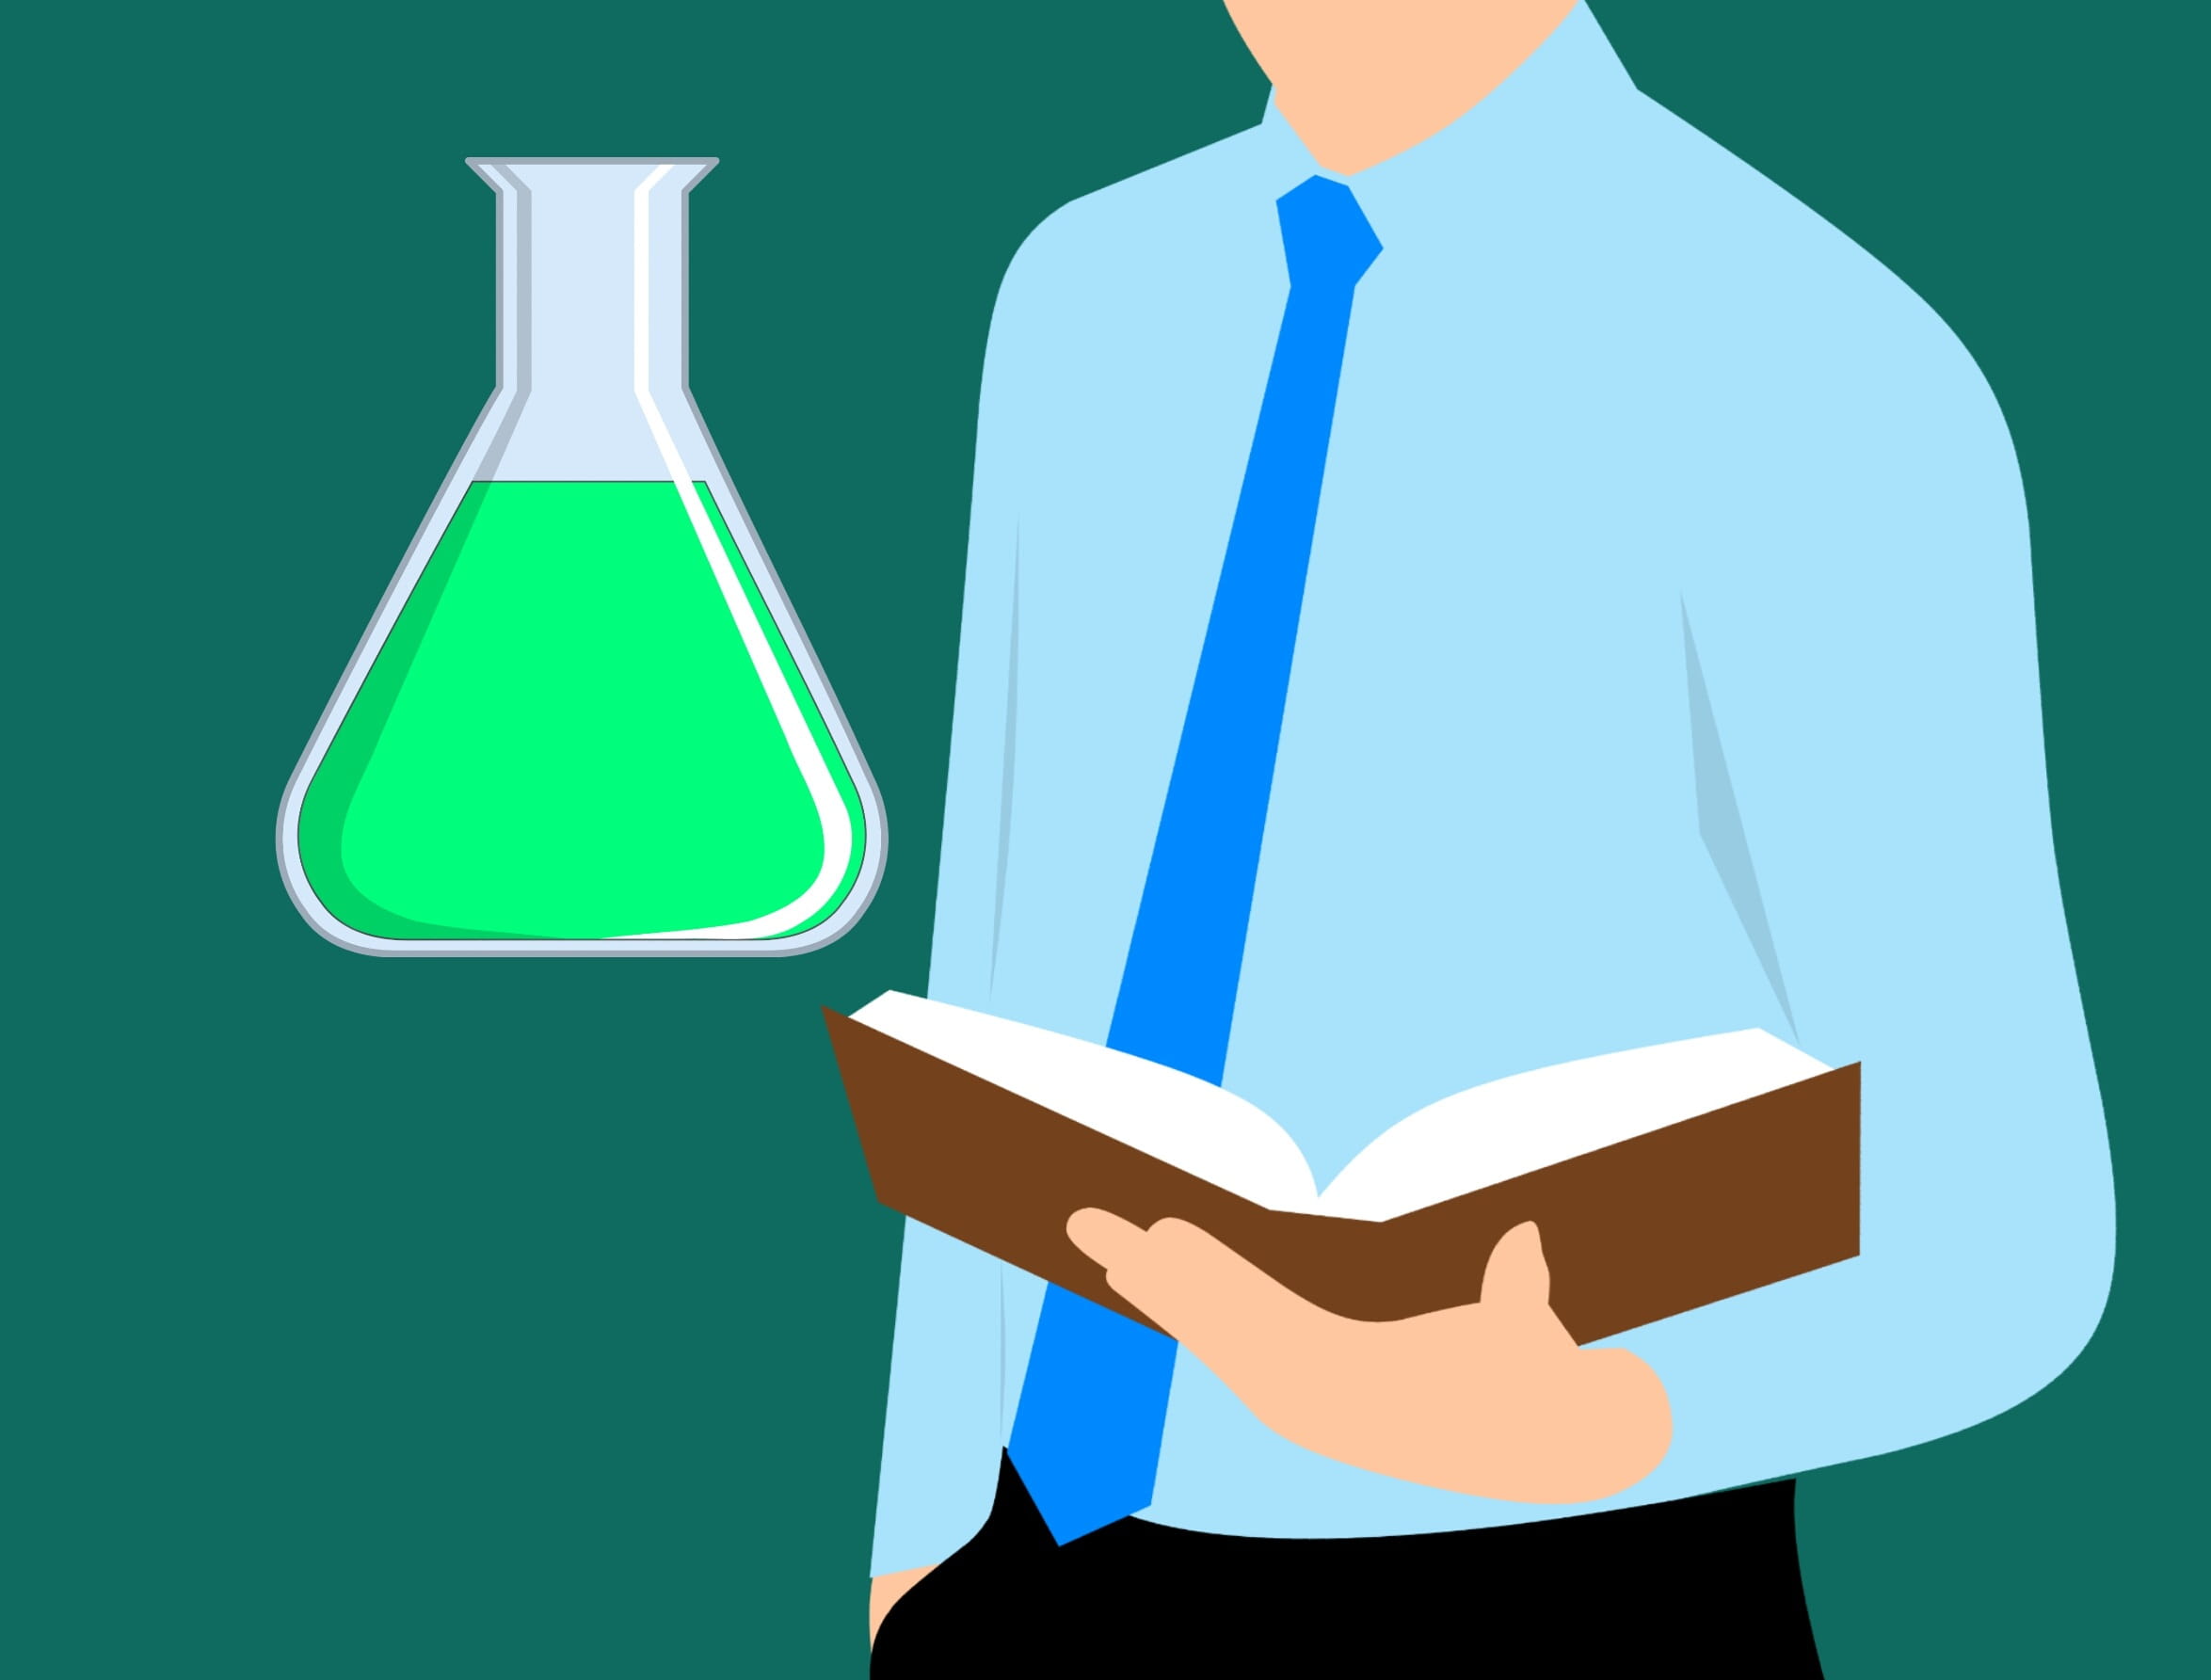 Man with open textbook and Erlenmeyer flask. Science illustration.